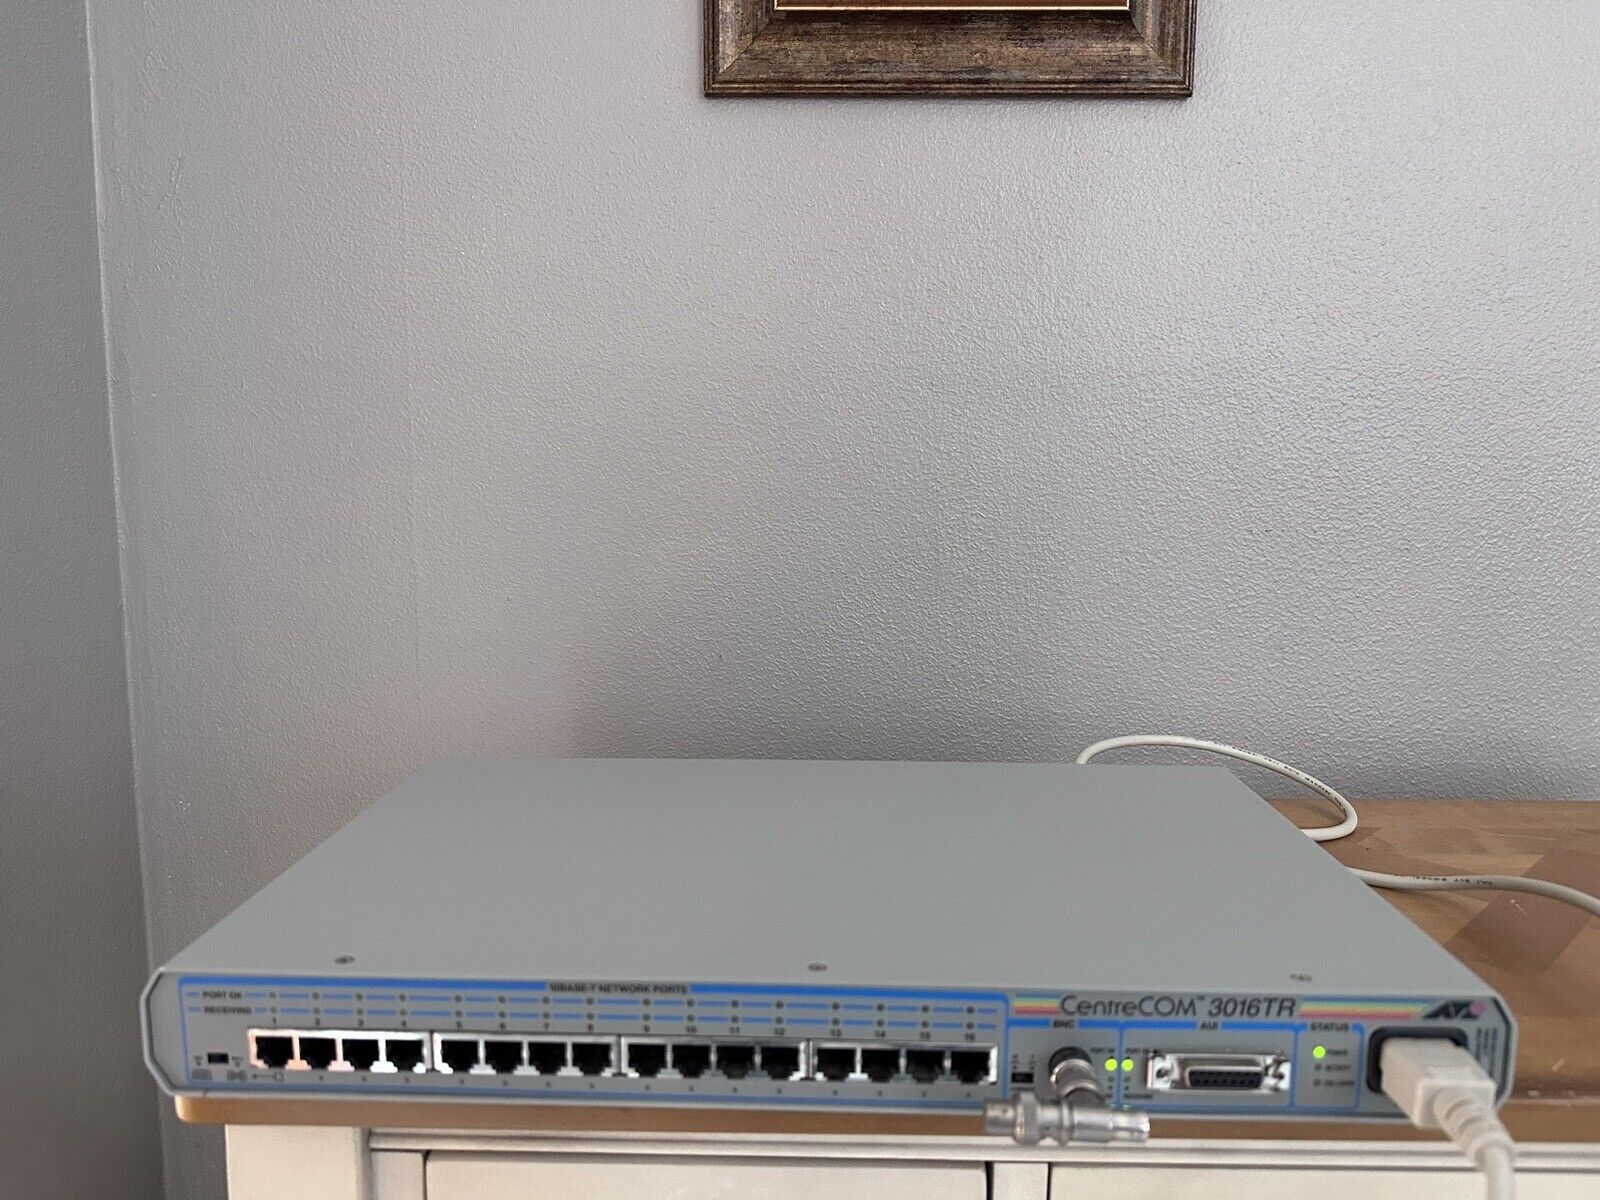 Allied Telesyn AT-3016TR CentreCOM 16-Port Network Hub With Cord. Tested